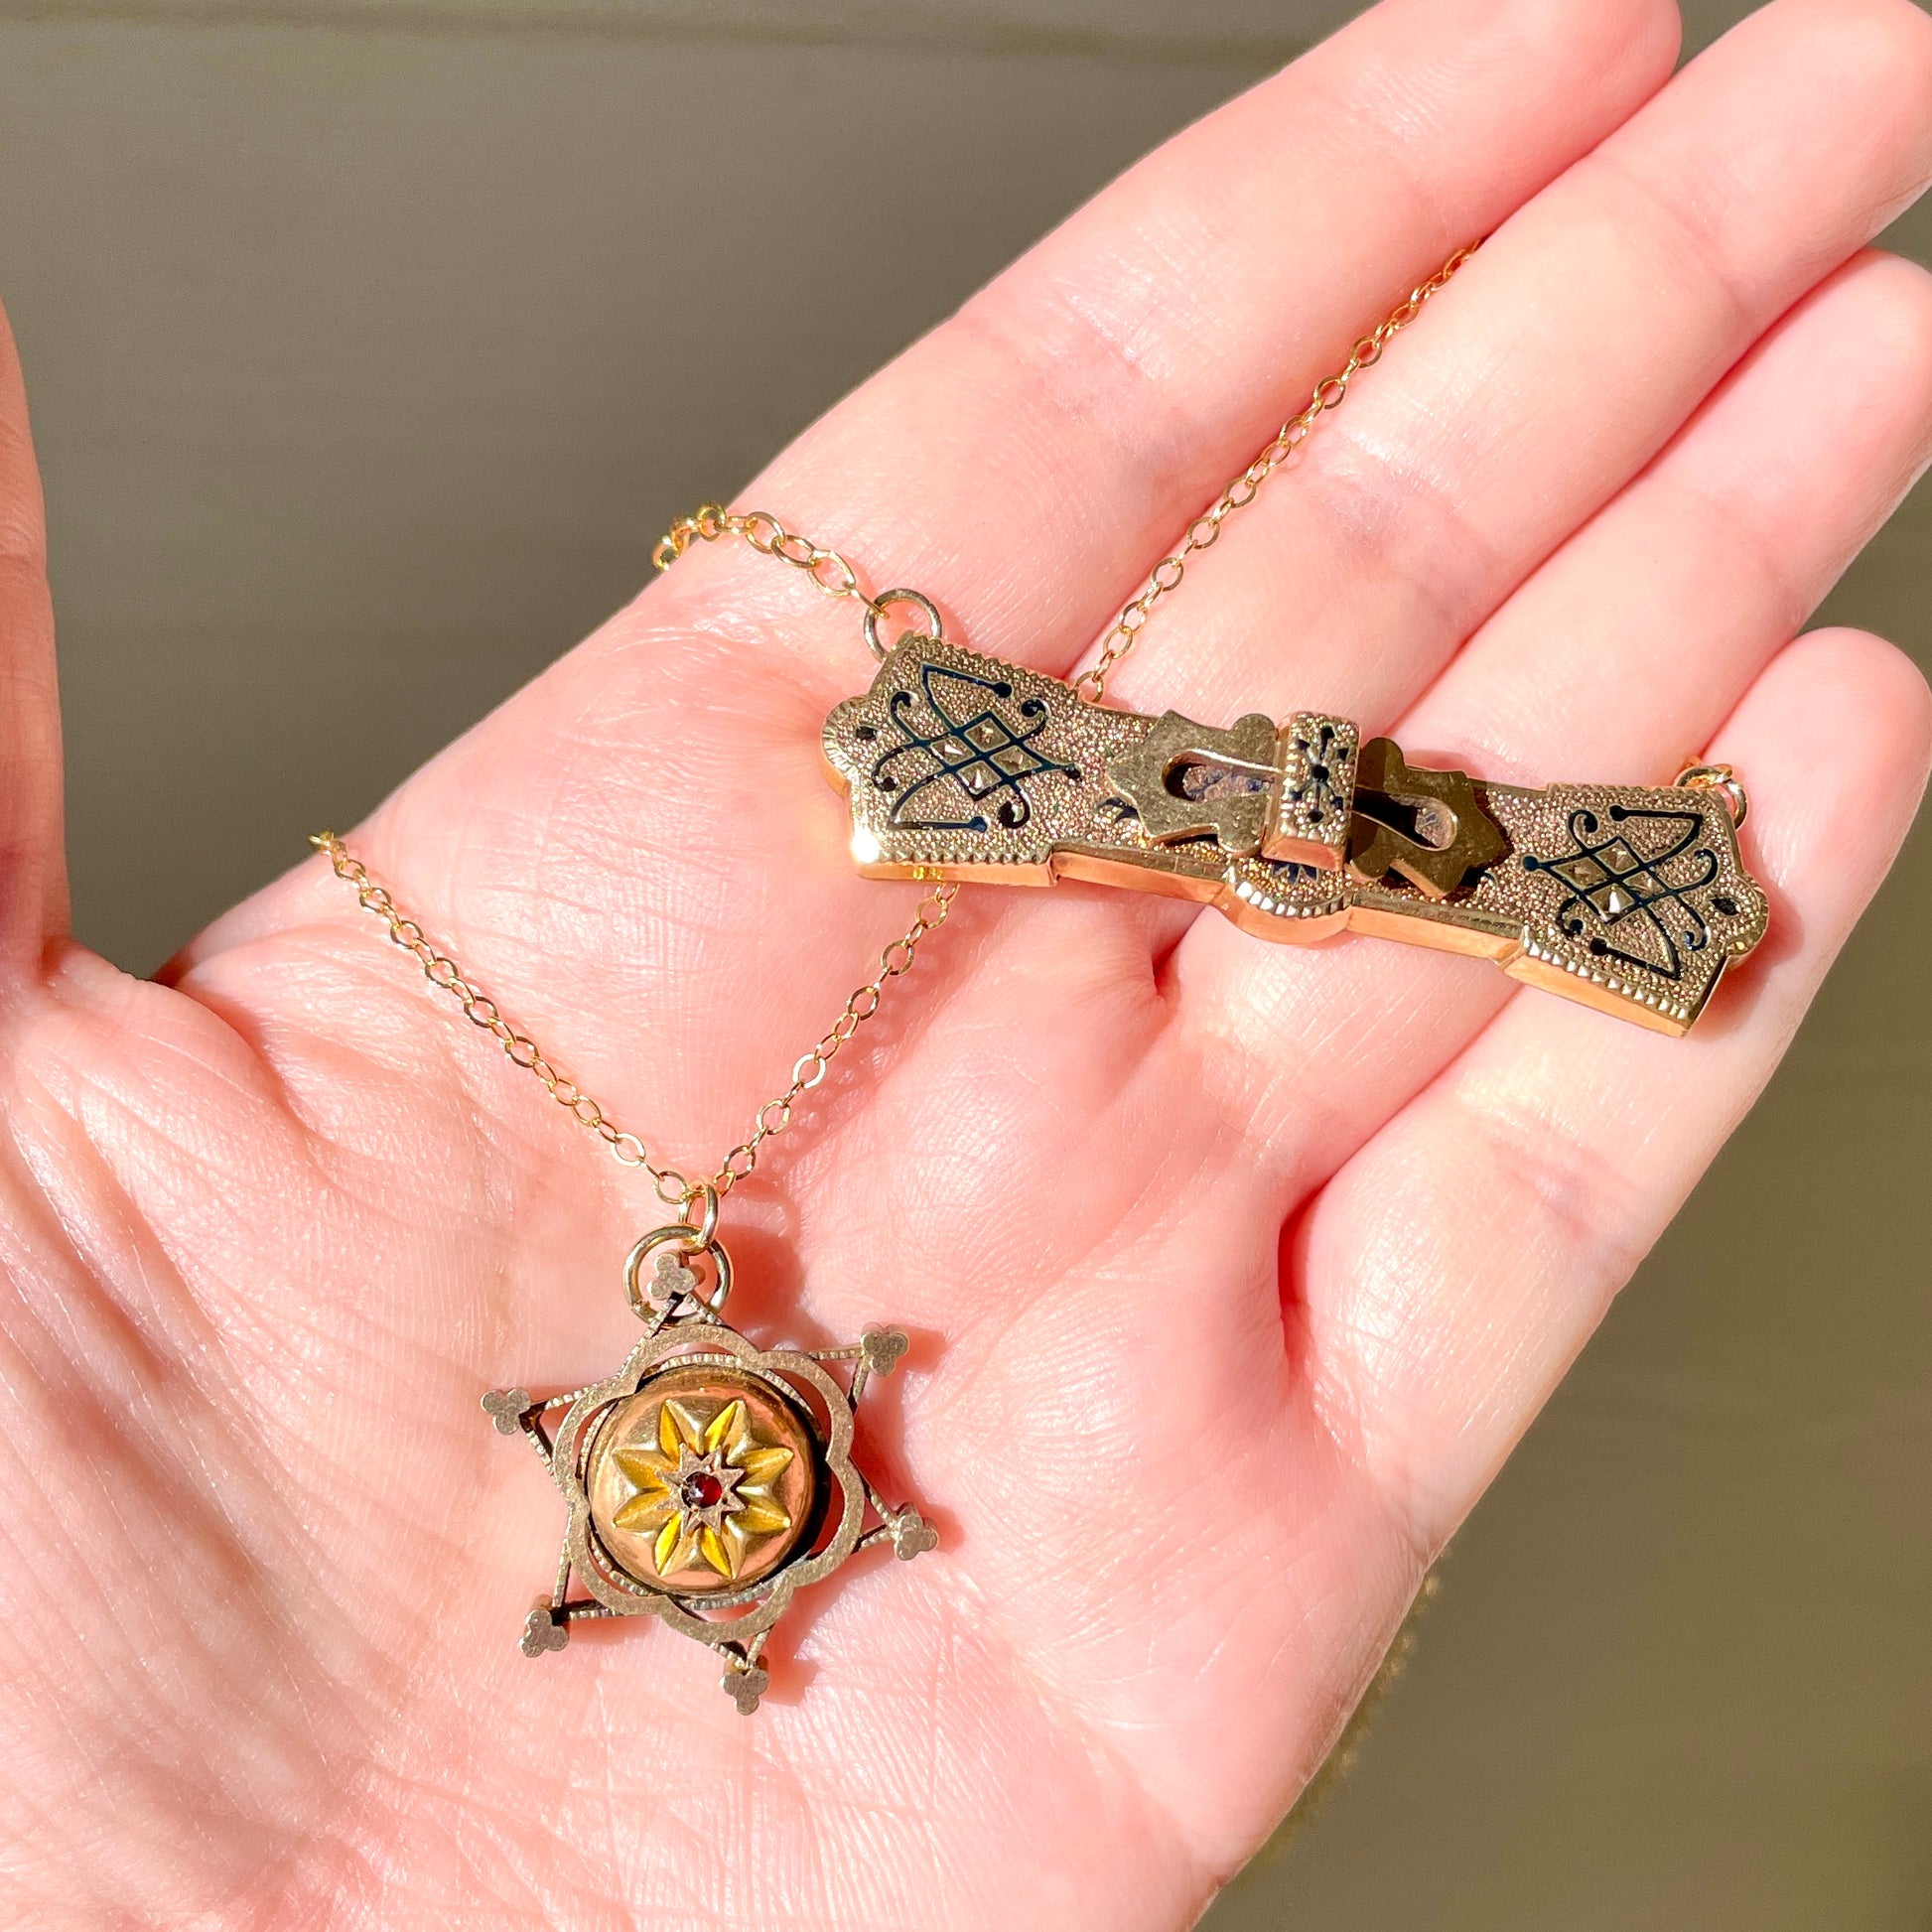 Antique Taille d'Epargne Black Enamel Buckle Bow Bar Pin Necklace and Six pointed star garnet brooch necklace